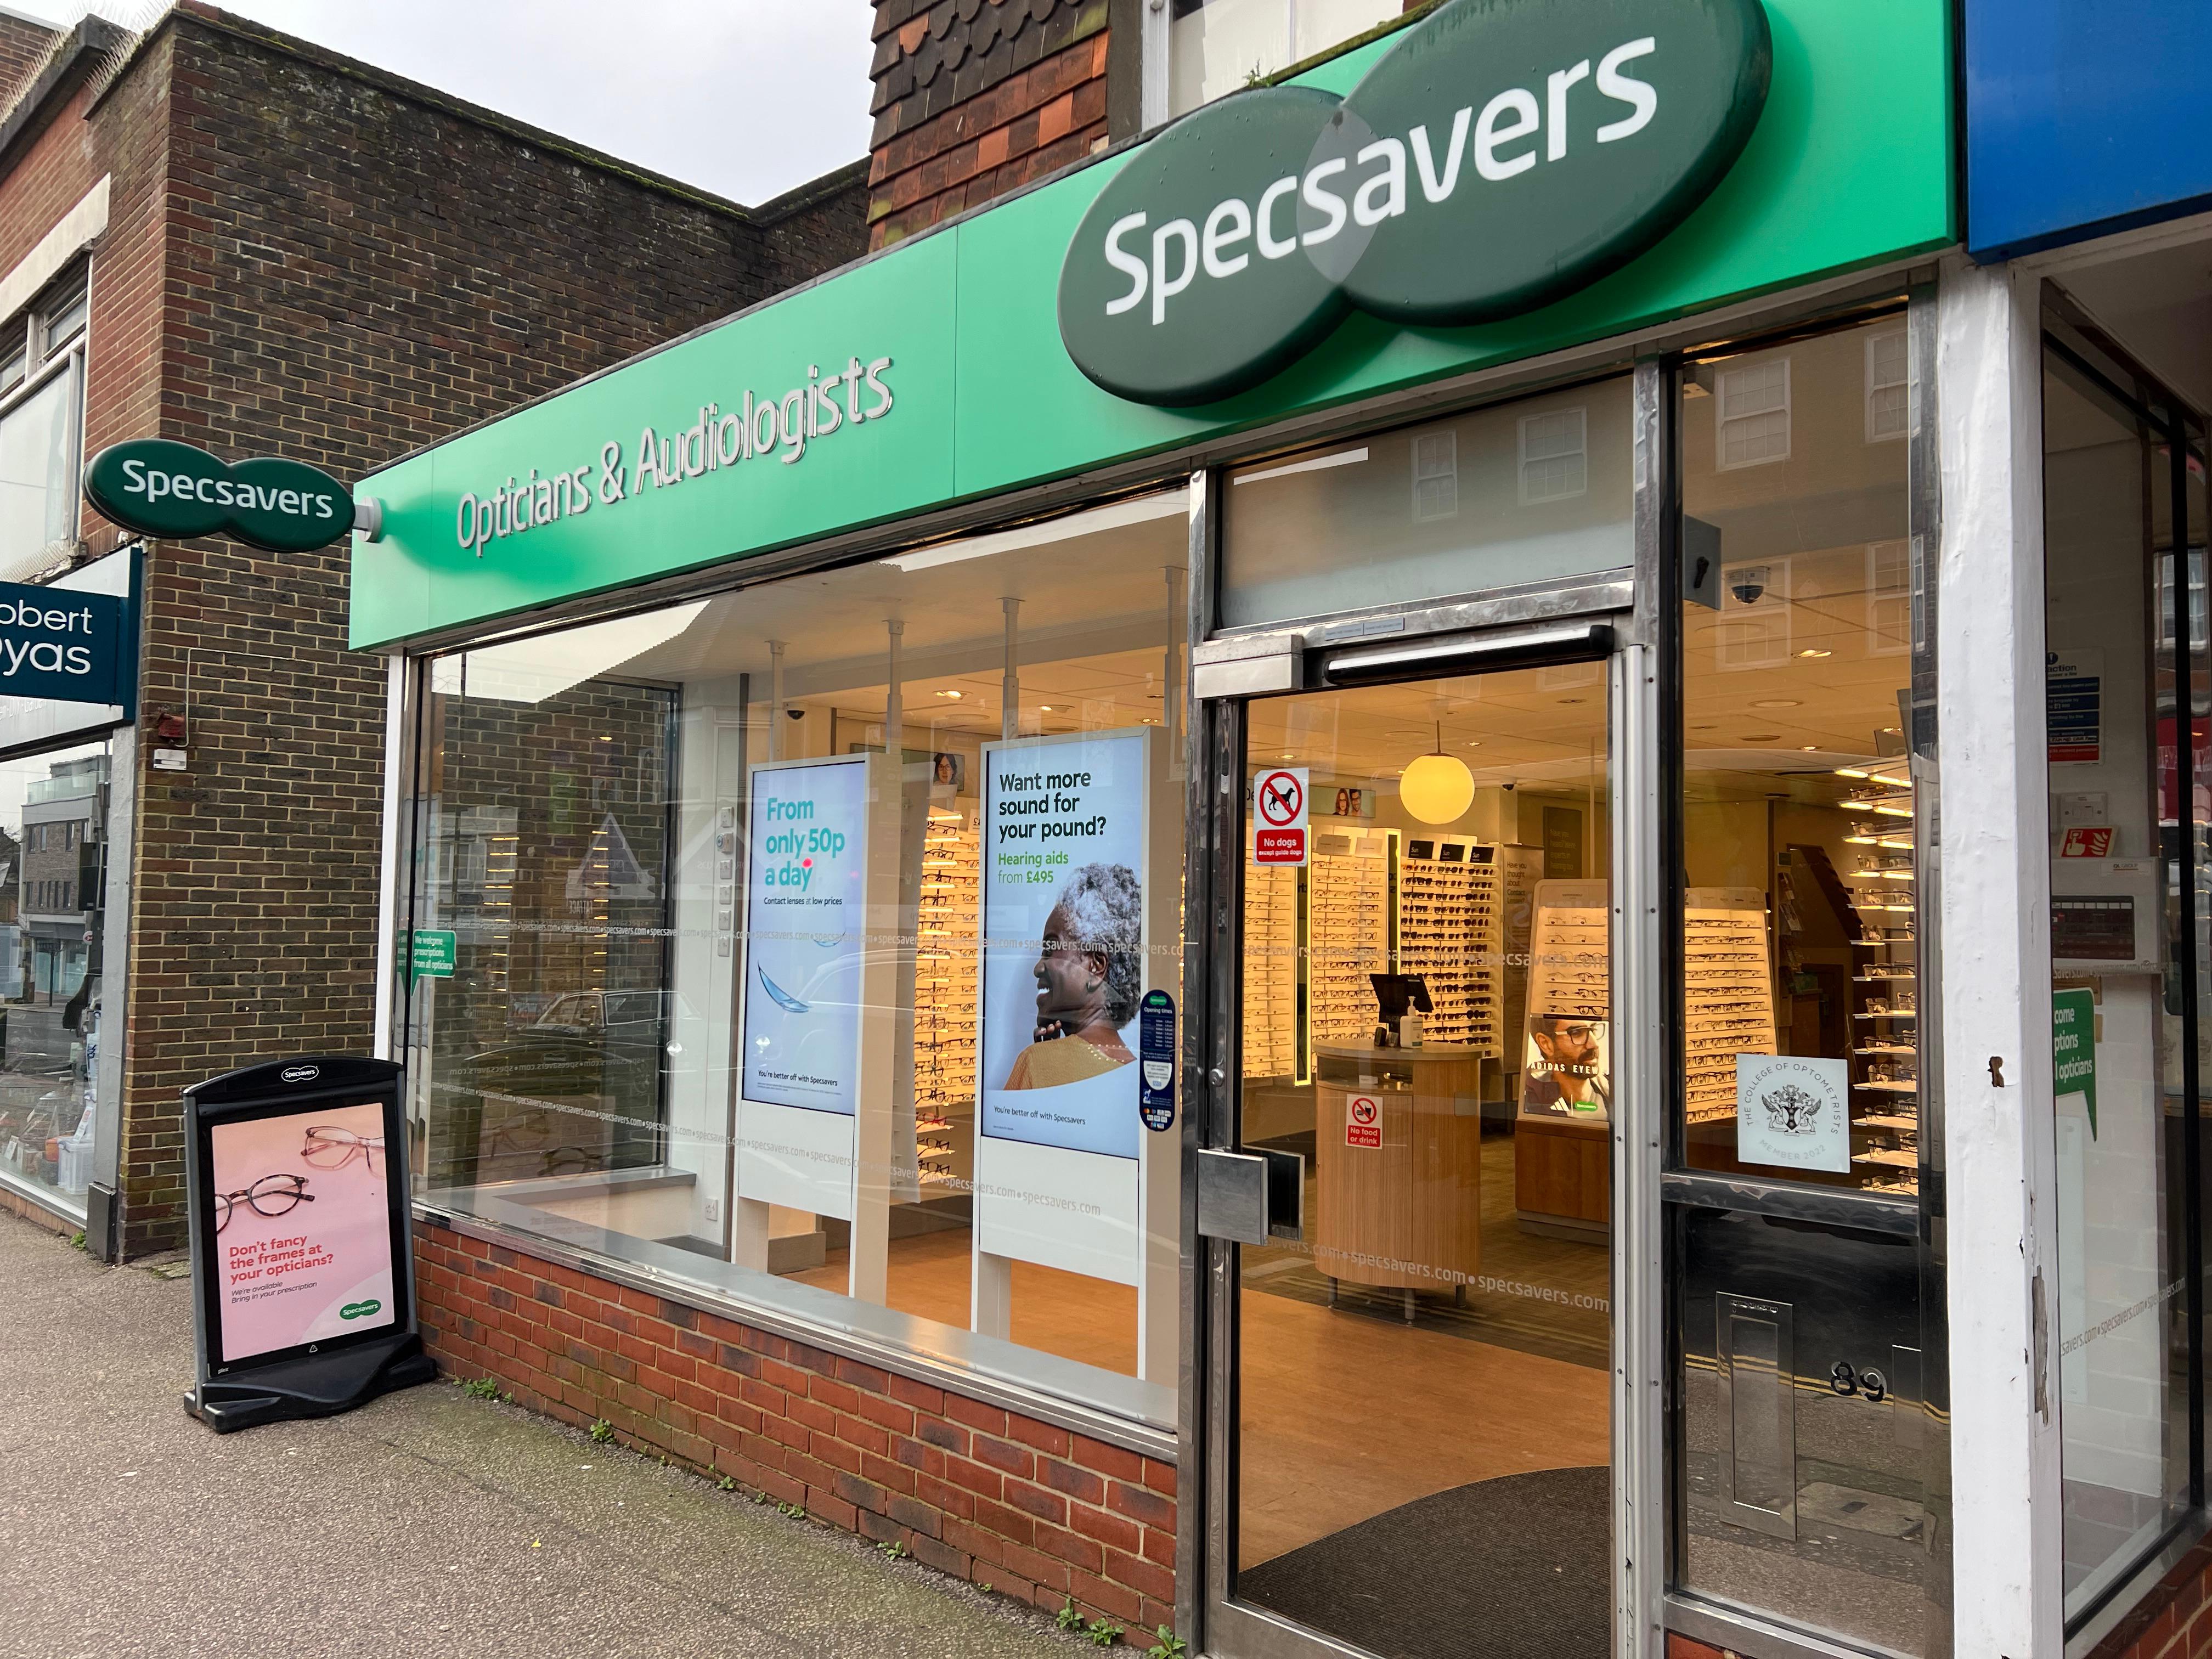 Images Specsavers Opticians and Audiologists - Haywards Heath